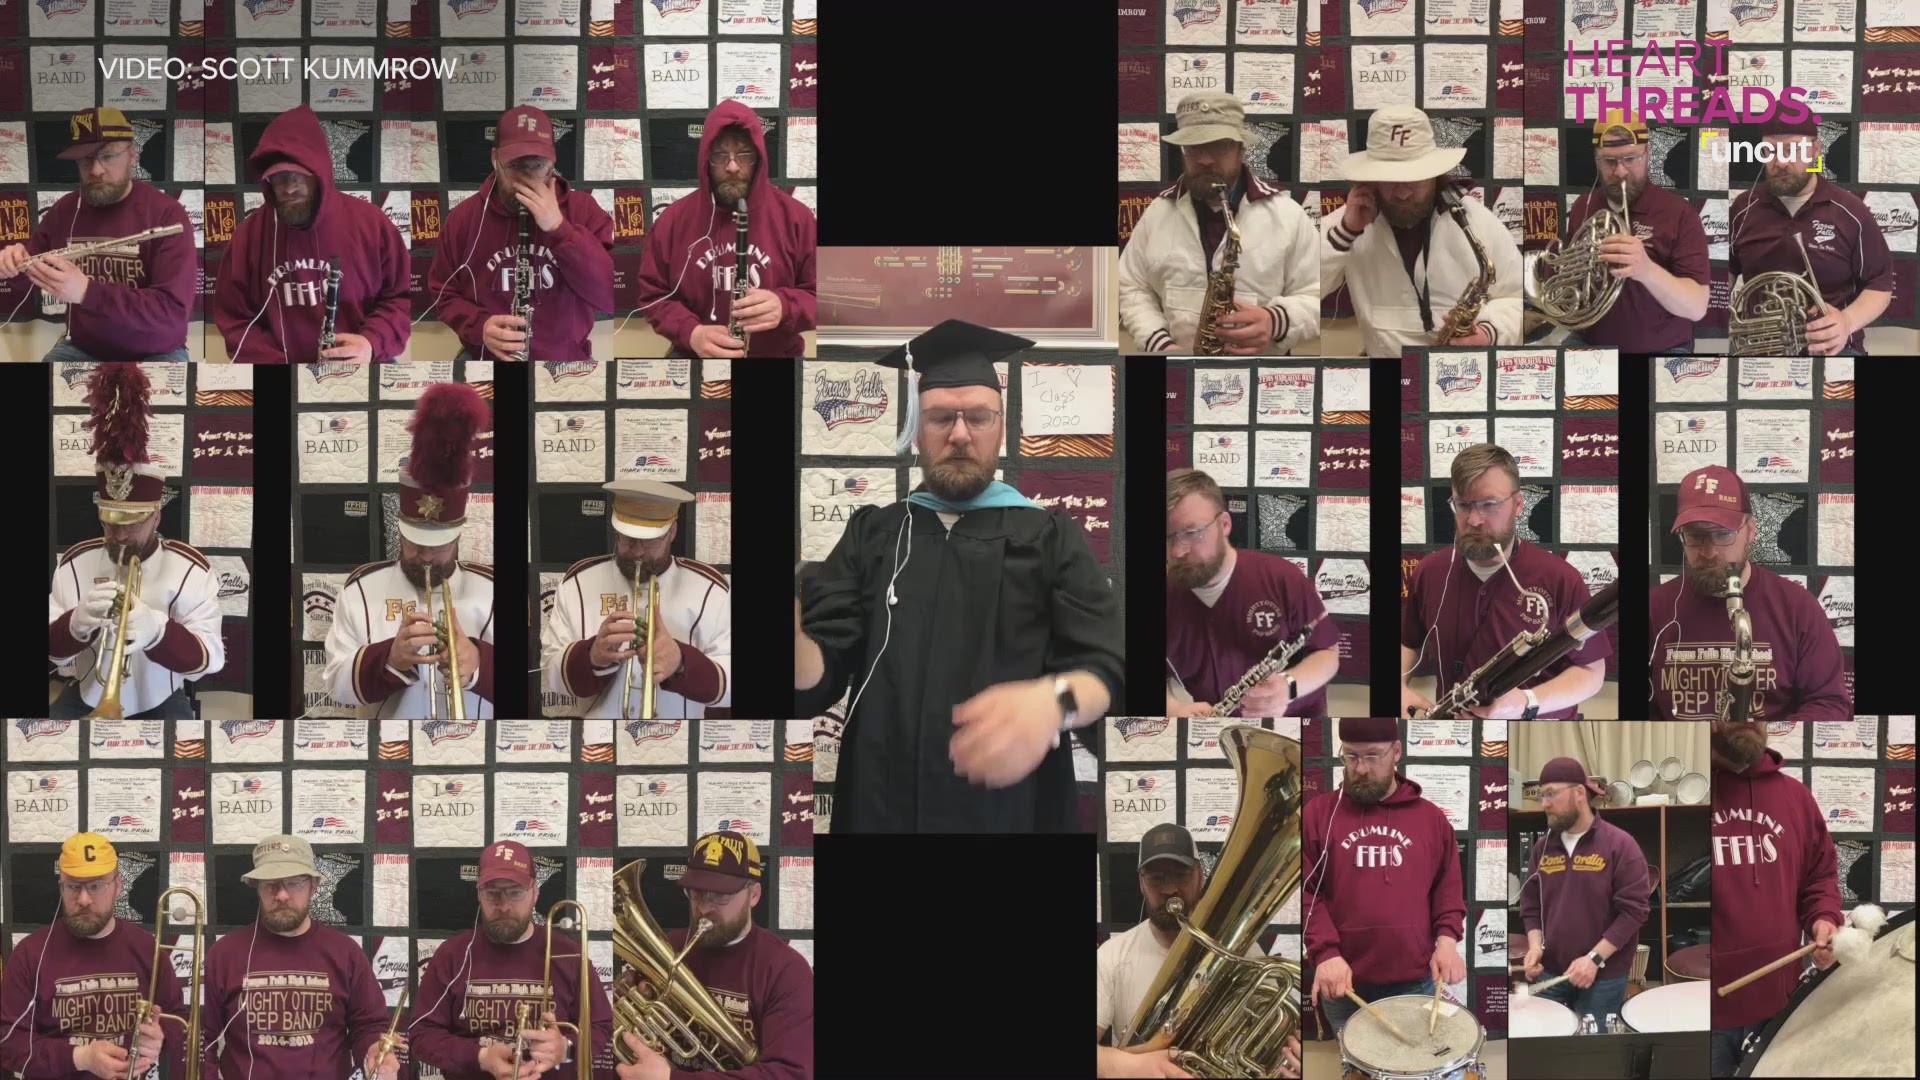 Watch this teacher give an impressive tribute to his students by playing all 22 parts of 'Pomp and Circumstance.'